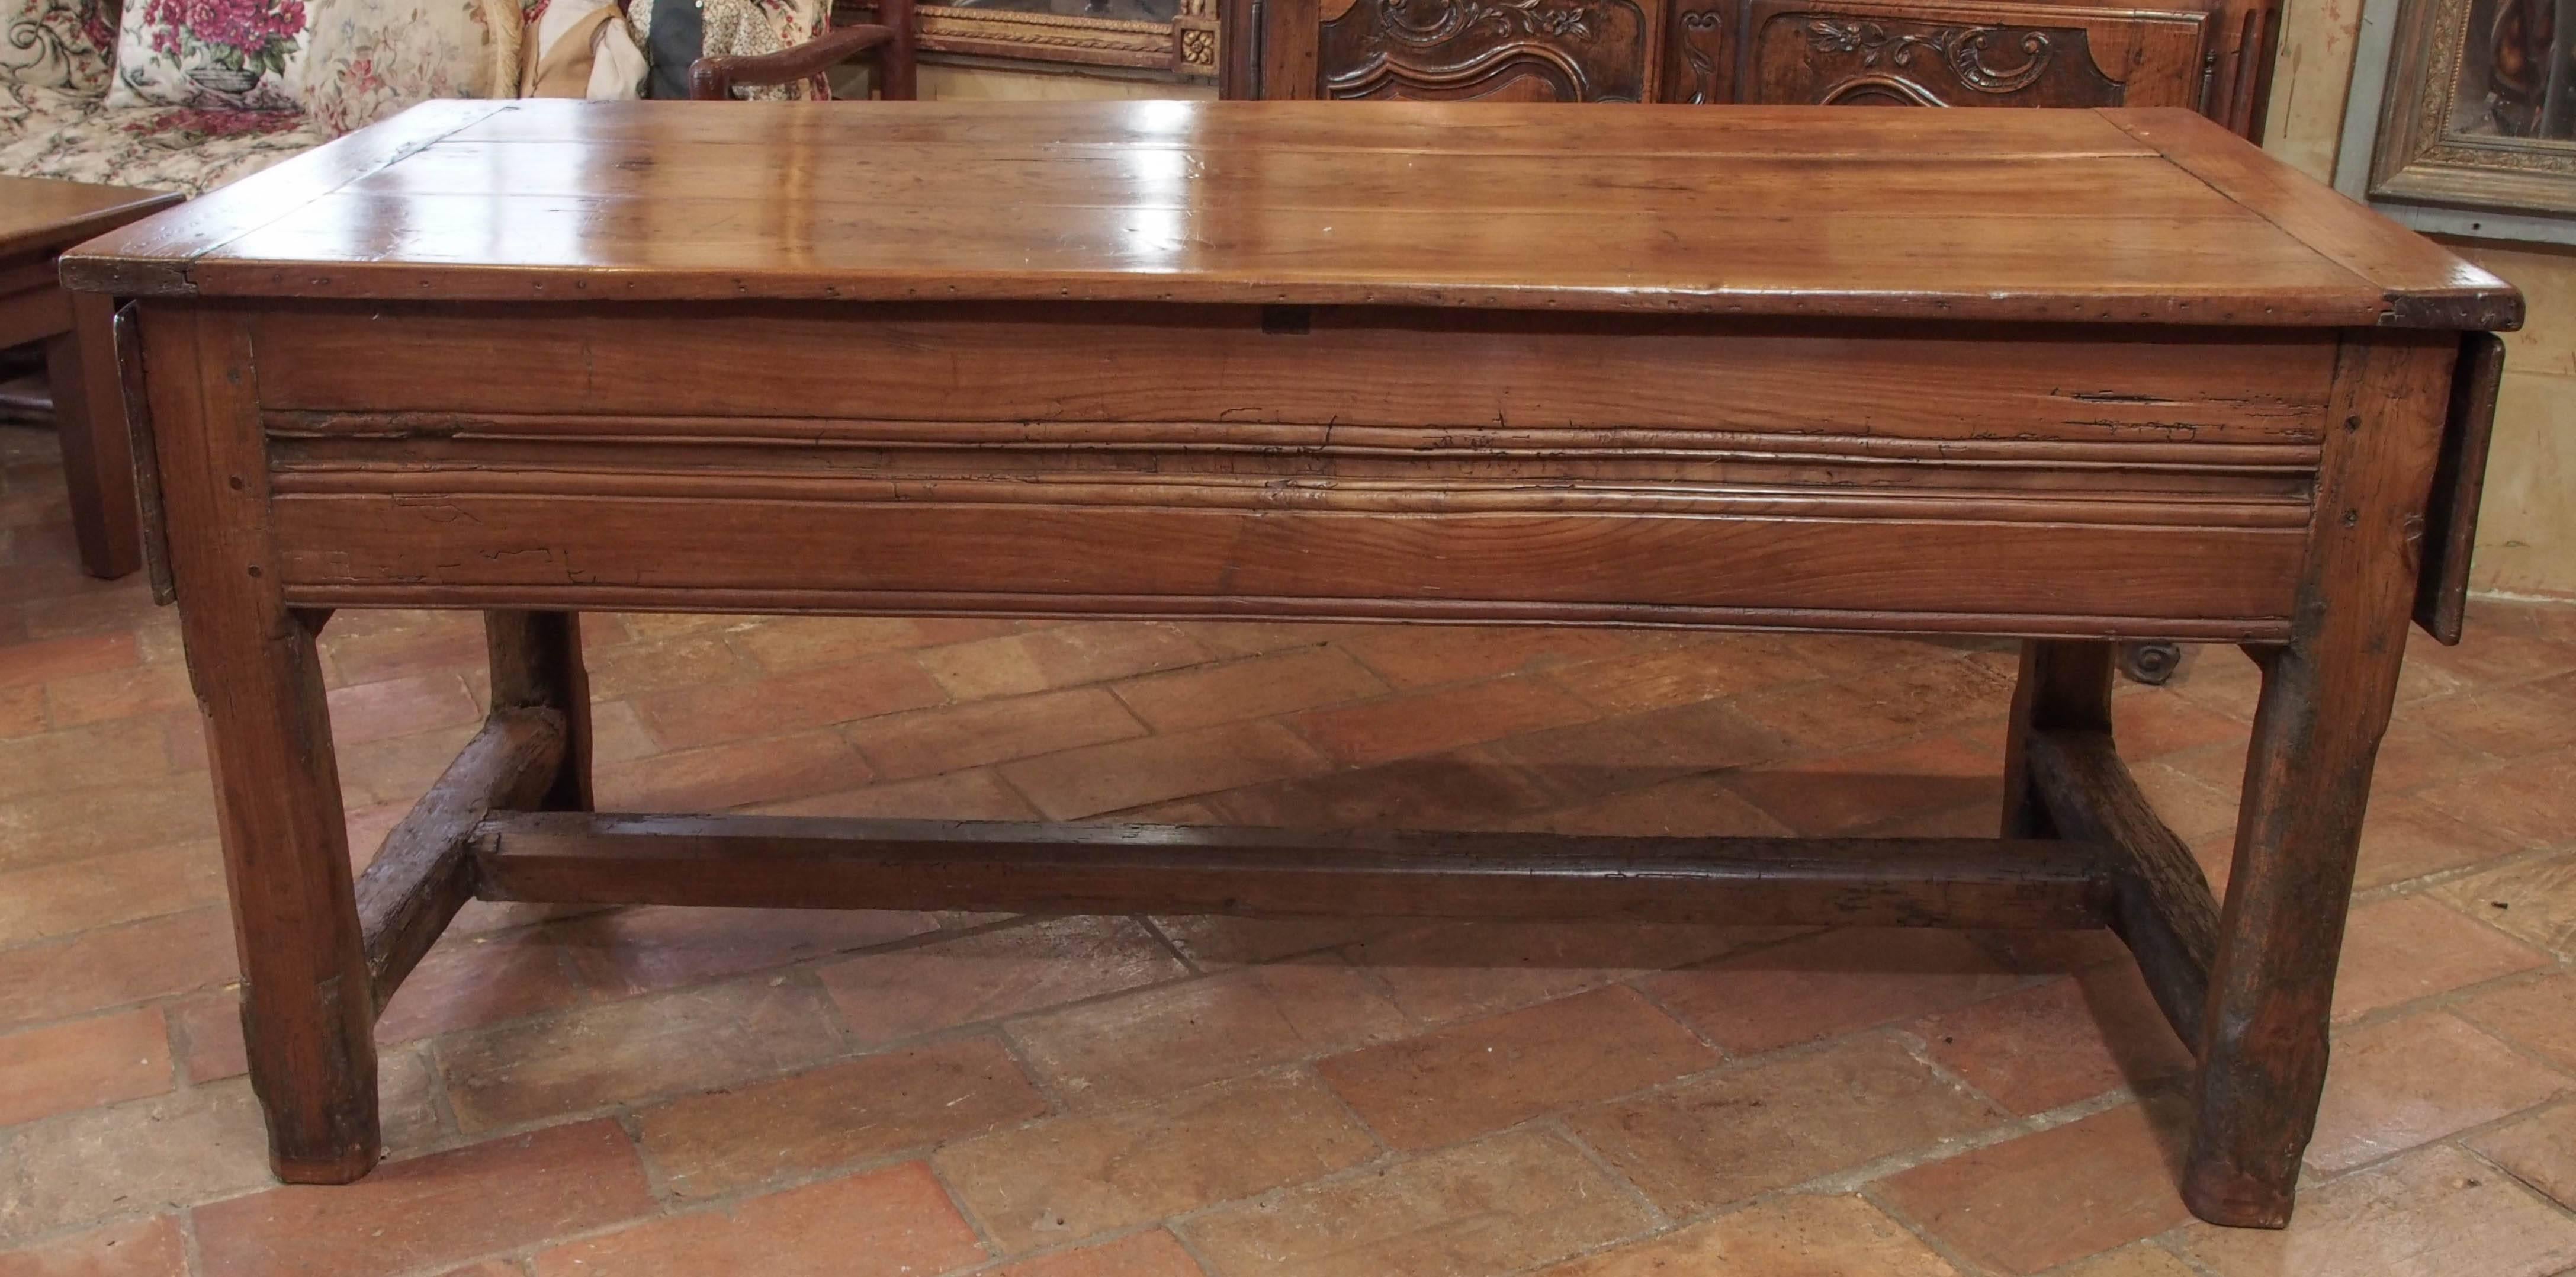 18th century French hand-carved cherry Louis XIV hunt table with rare original drawers at both ends and hand-forged drawer pulls original patina. This table is from the Morvan area located in the Burgandy. This table would be wonderful as a sofa